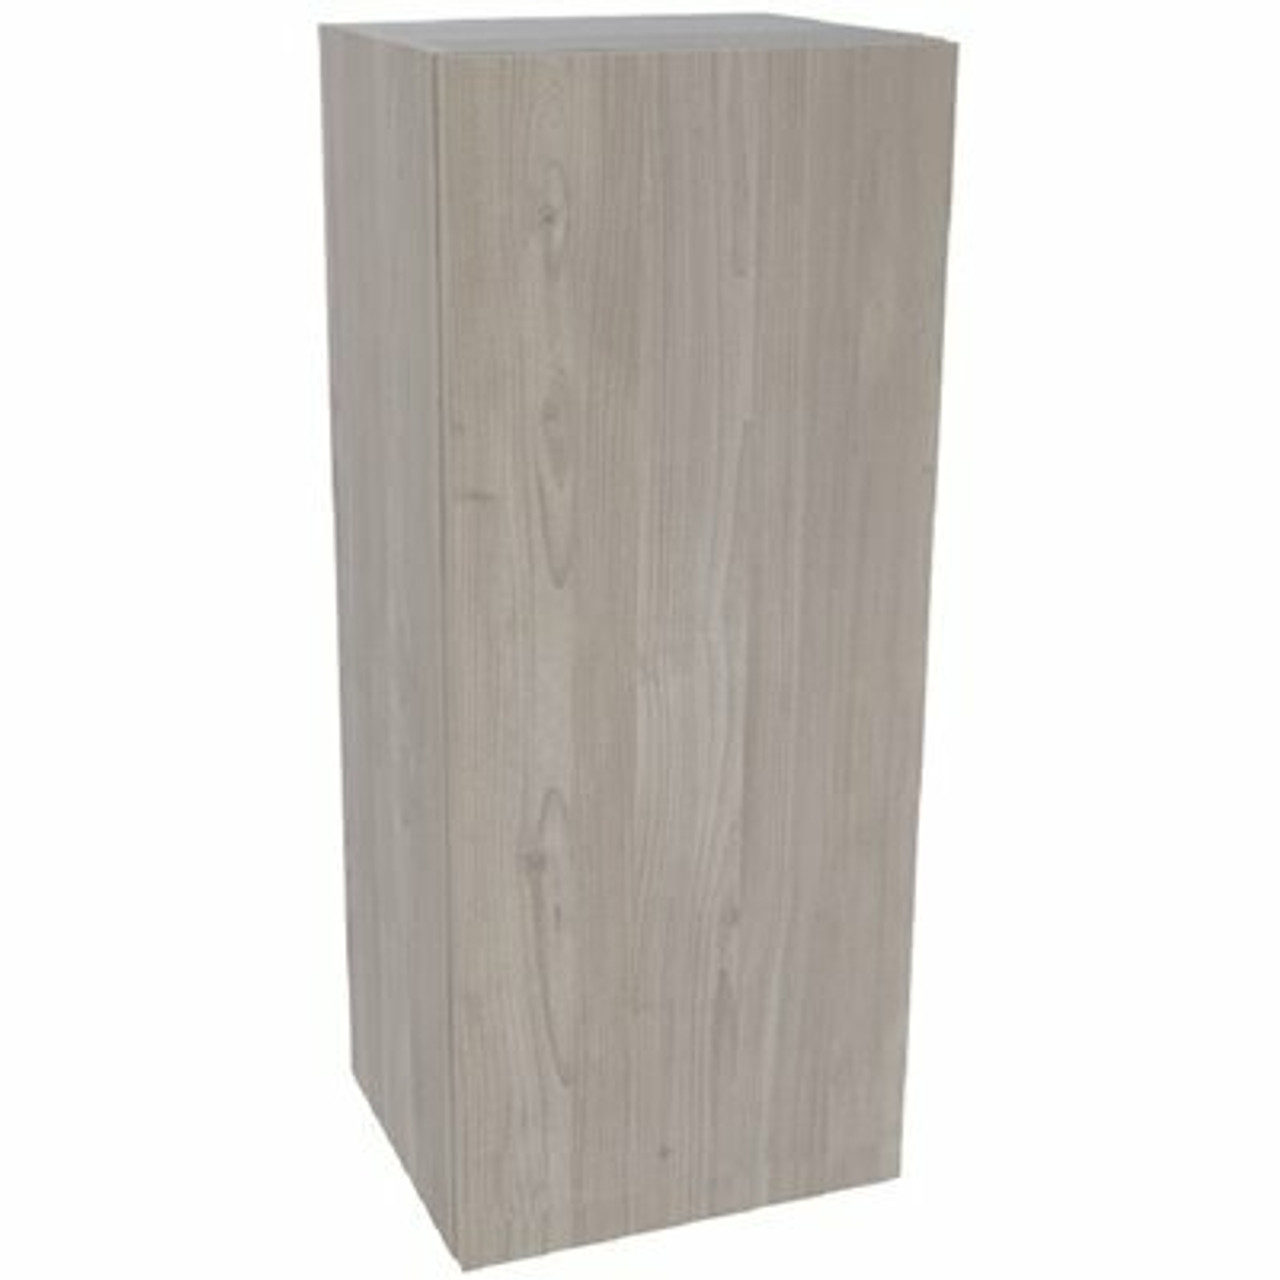 Cambridge Ready To Assemble Threespine 9 In. X 42 In. X 12 In. Stock Wall Cabinet In Grey Nordic